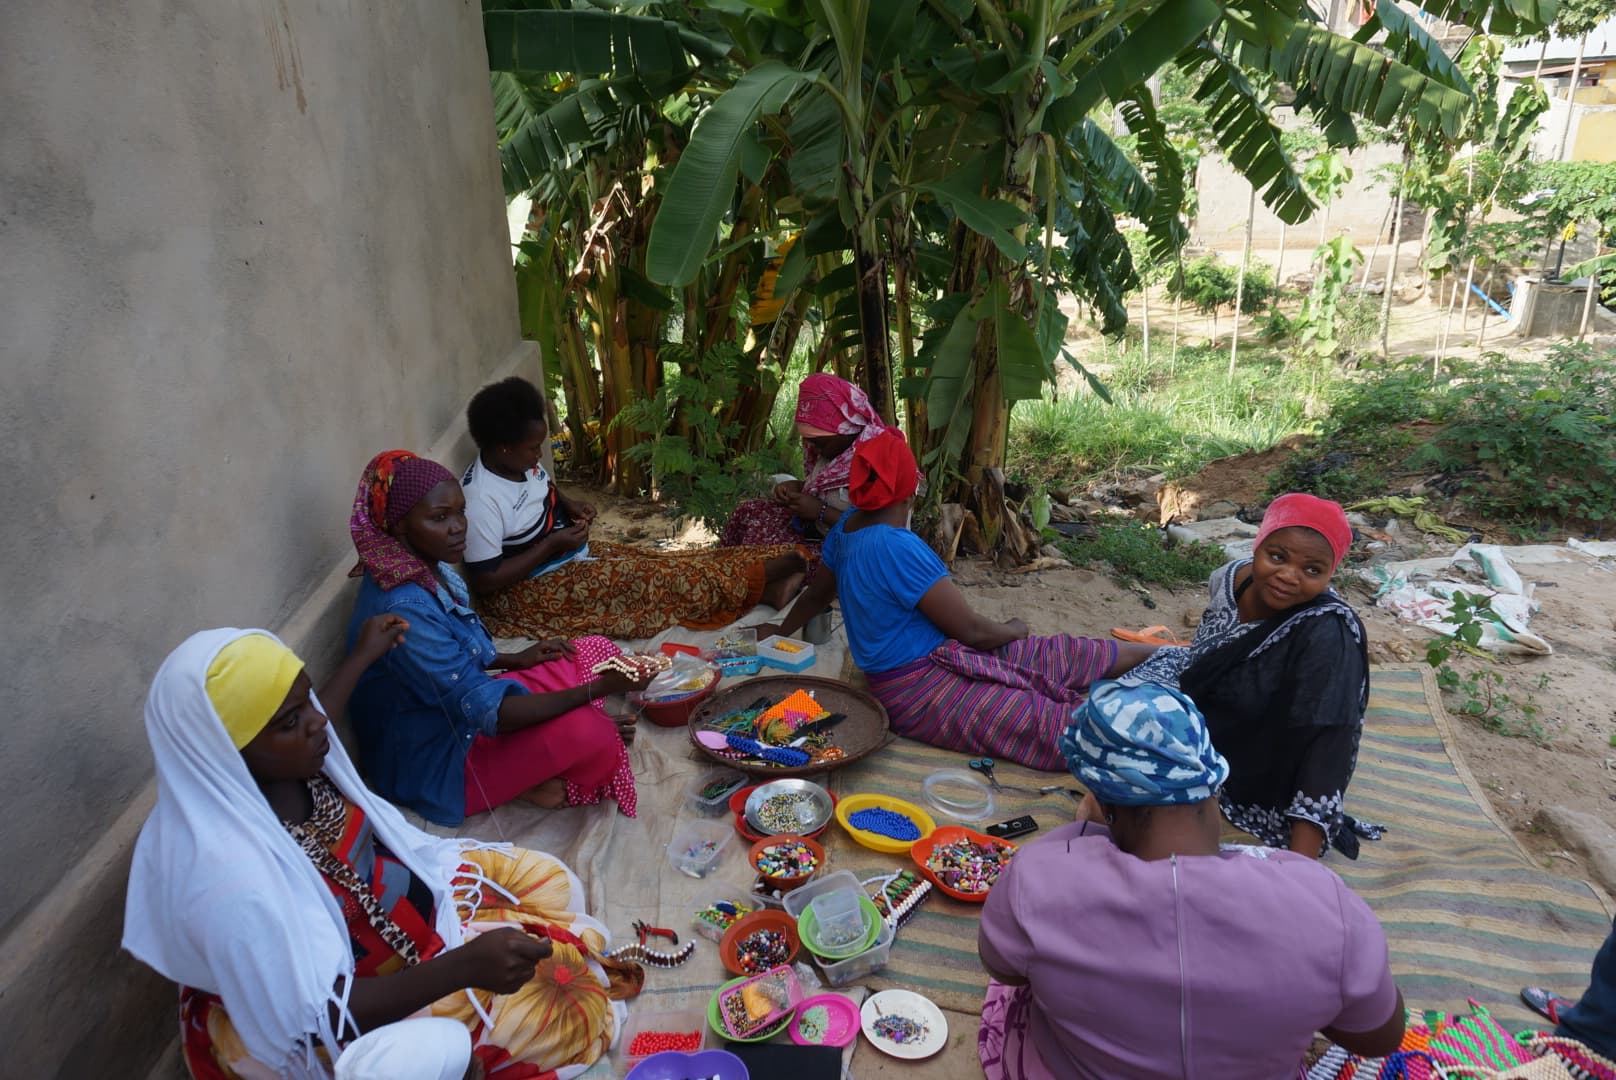 The entrepreneurship class with women and children from the neighborhood